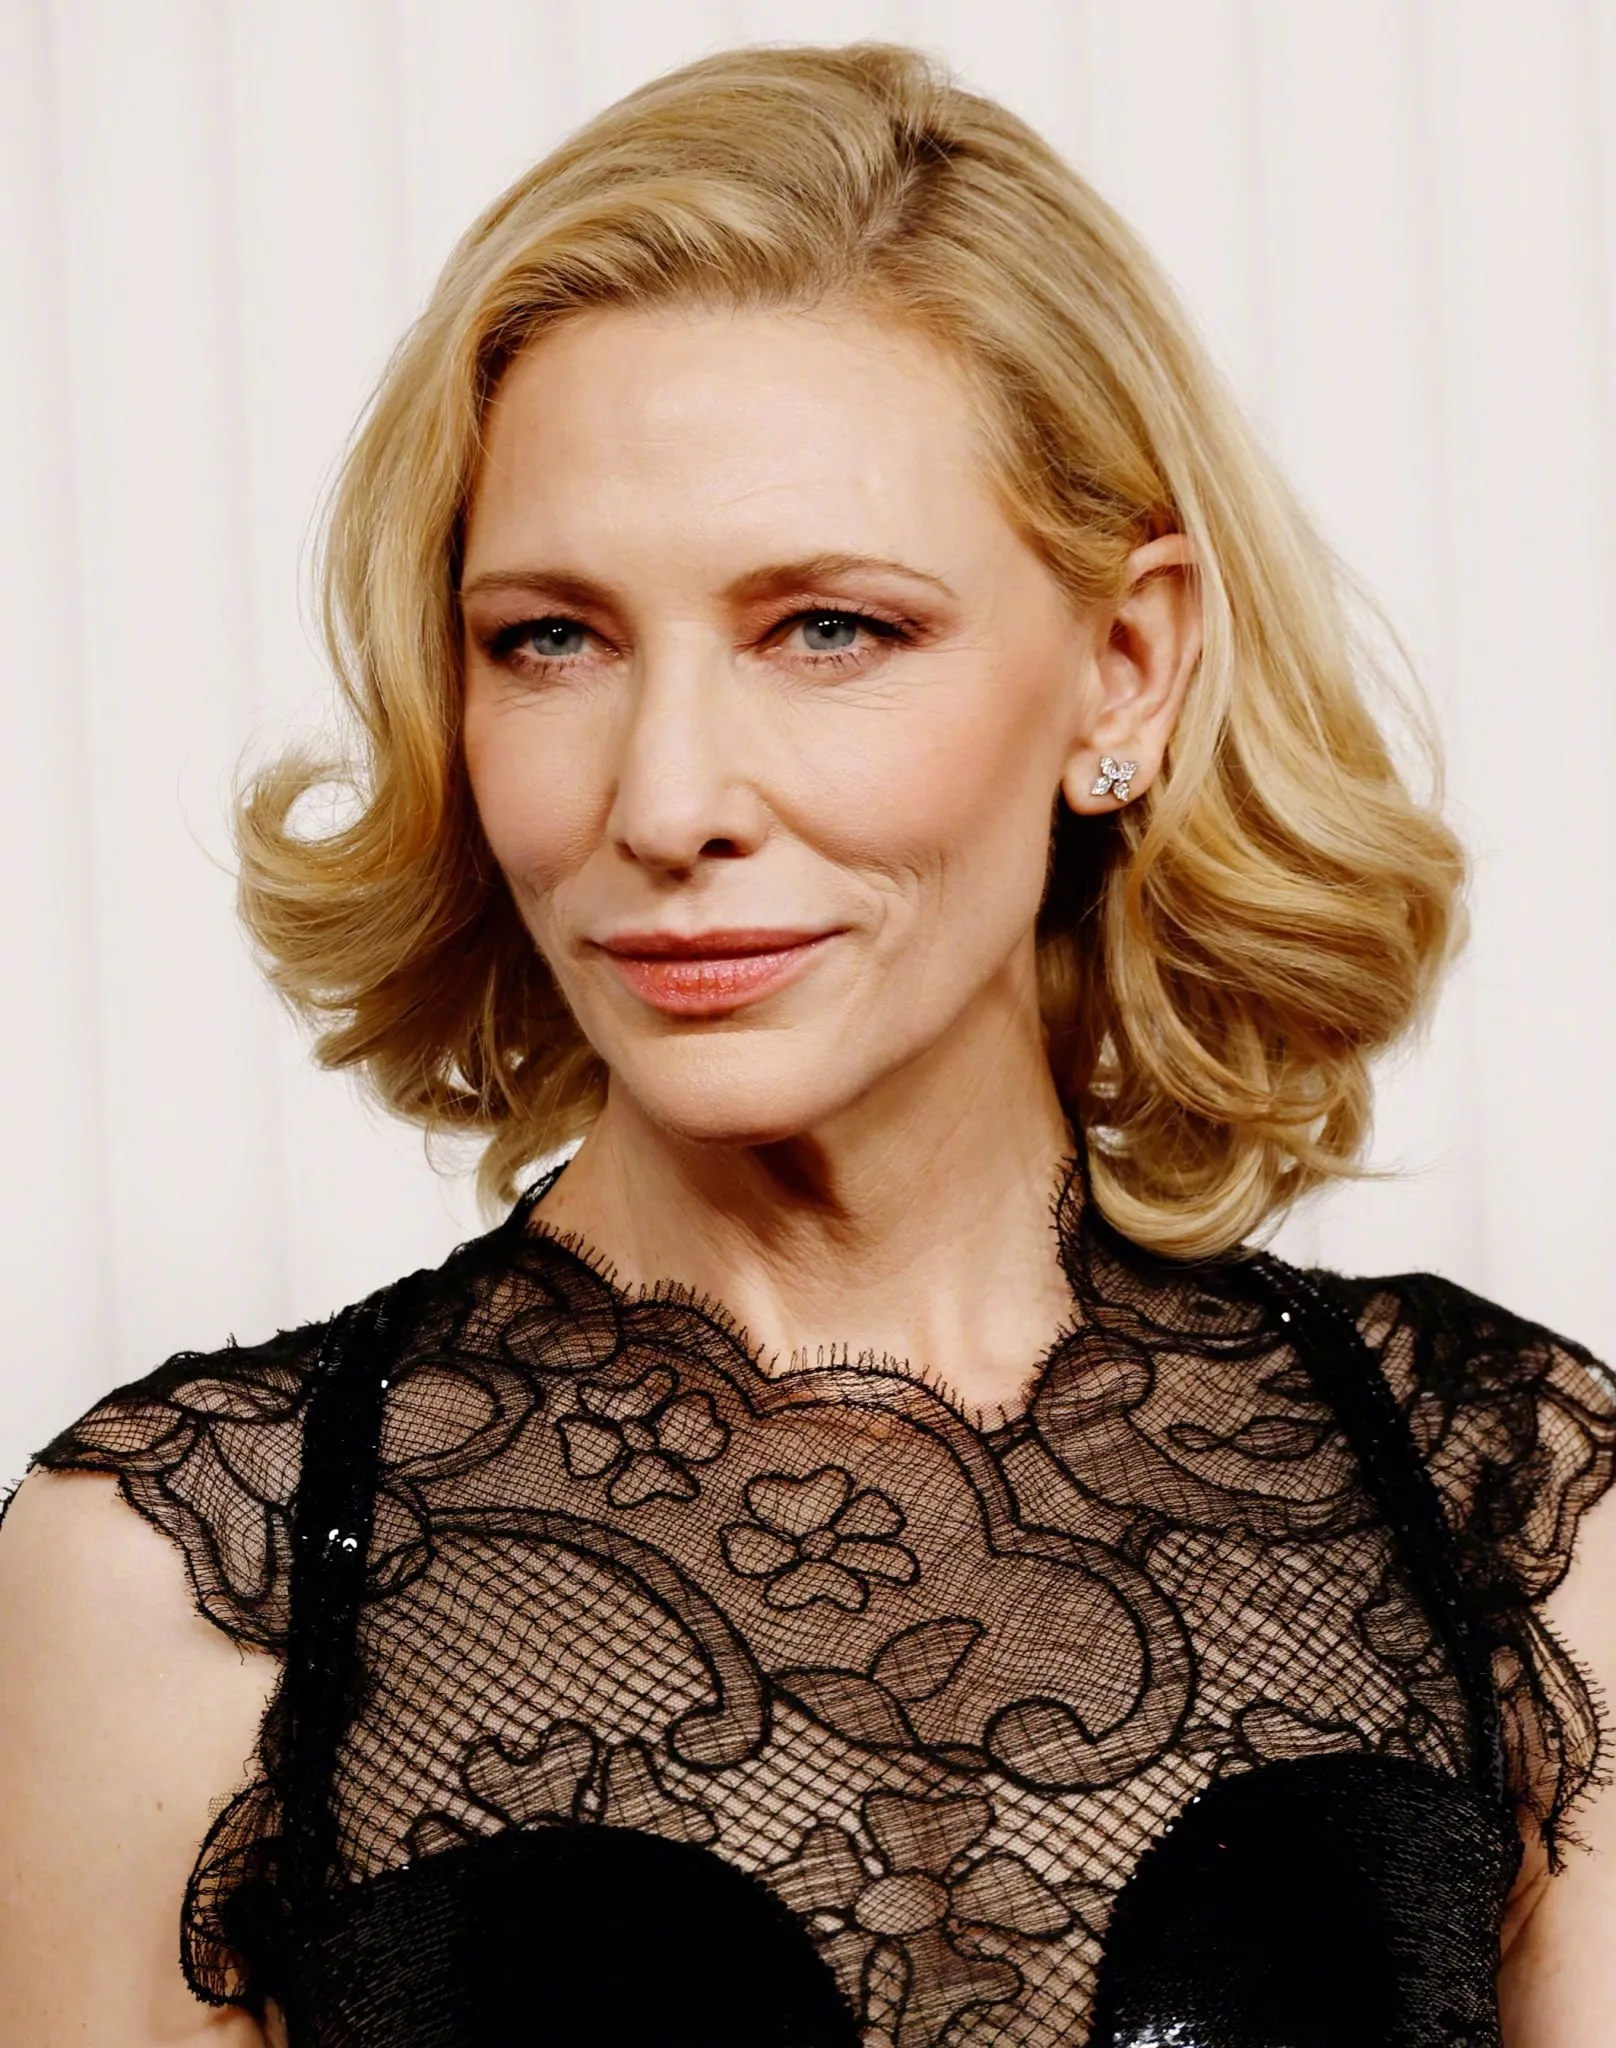 Cate Blanchett attends 2023 Screen Actors Guild Awards red carpet | FMV6